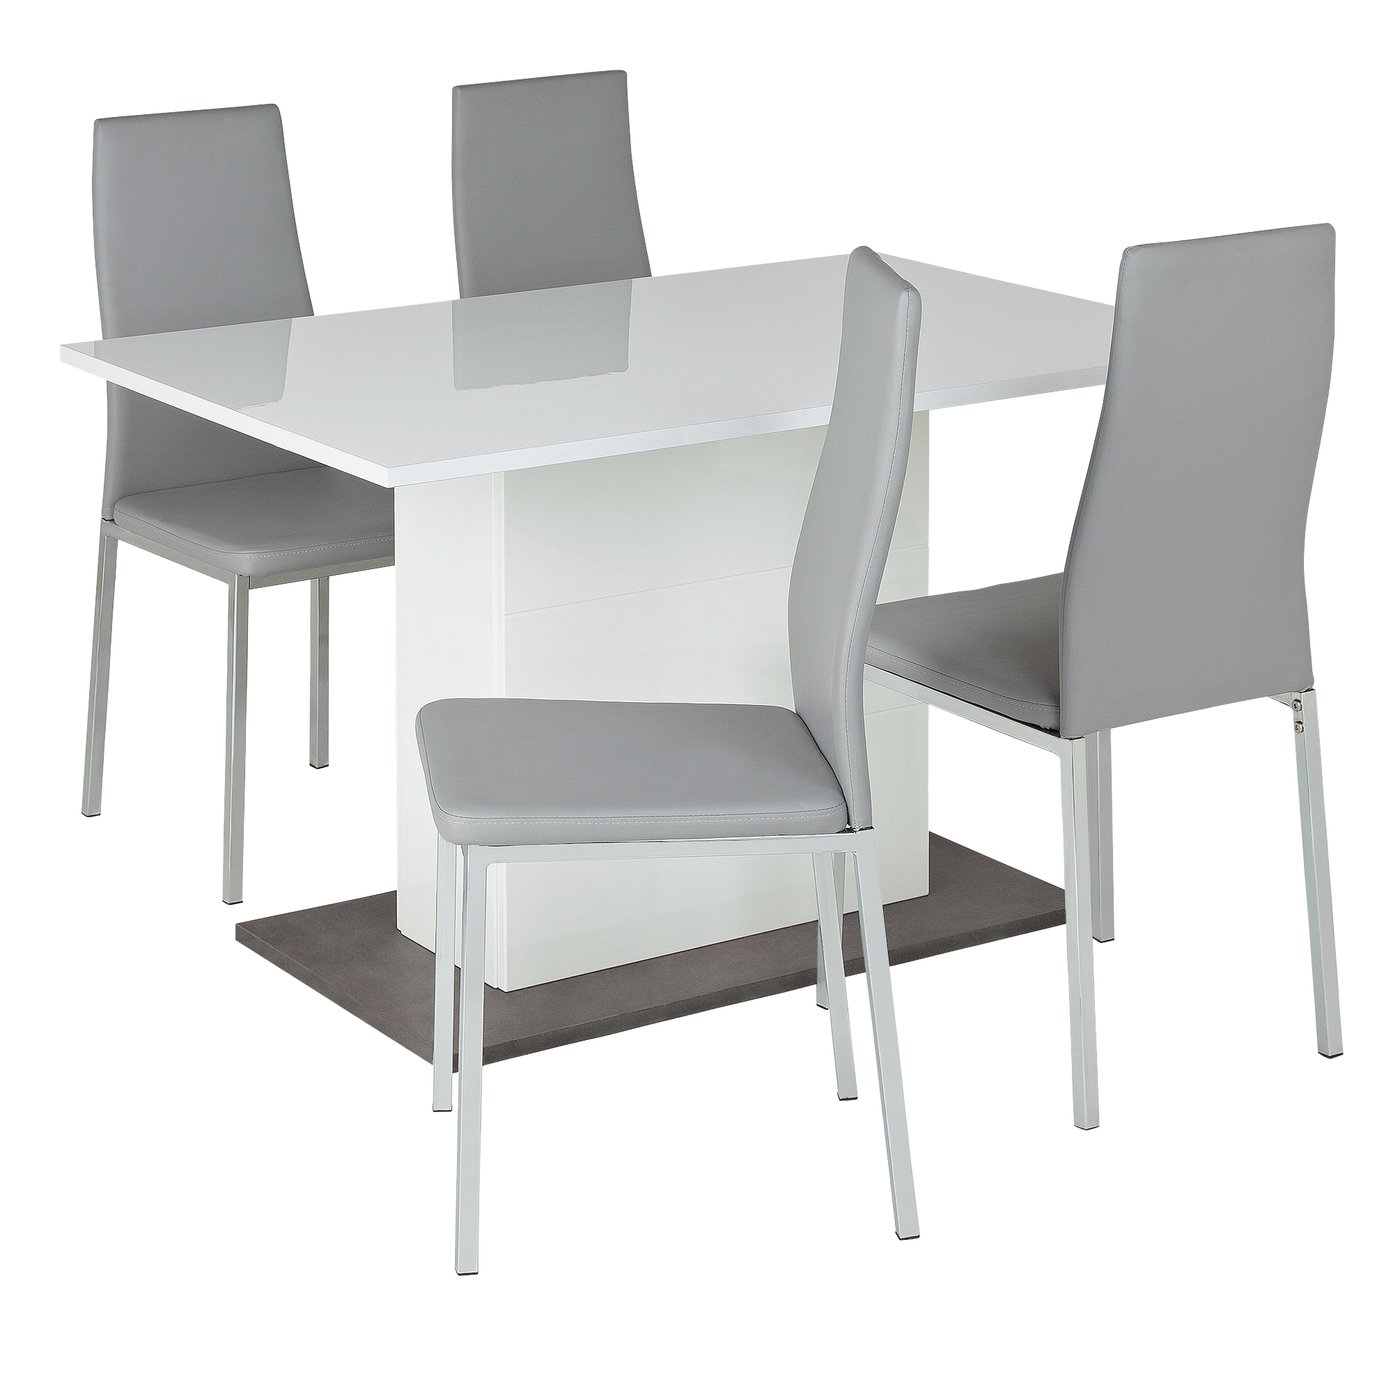 Argos Home Holborn White Gloss Dining Table & 4 Grey Chairs